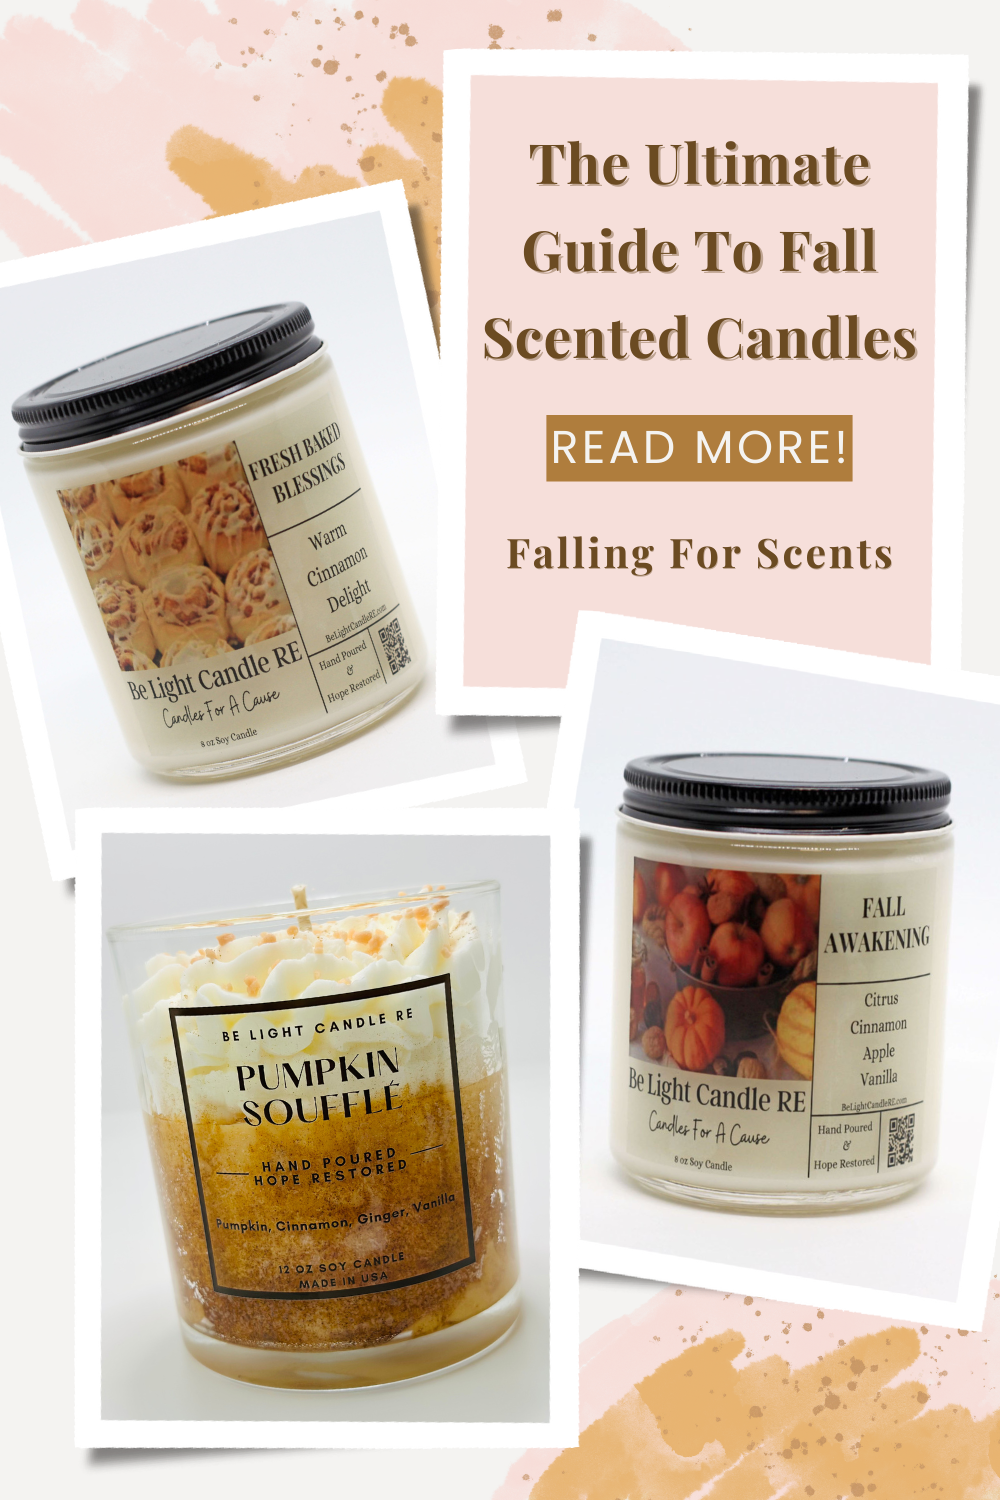 Falling For Scents: The Ultimate Guide To Fall Scented Candles